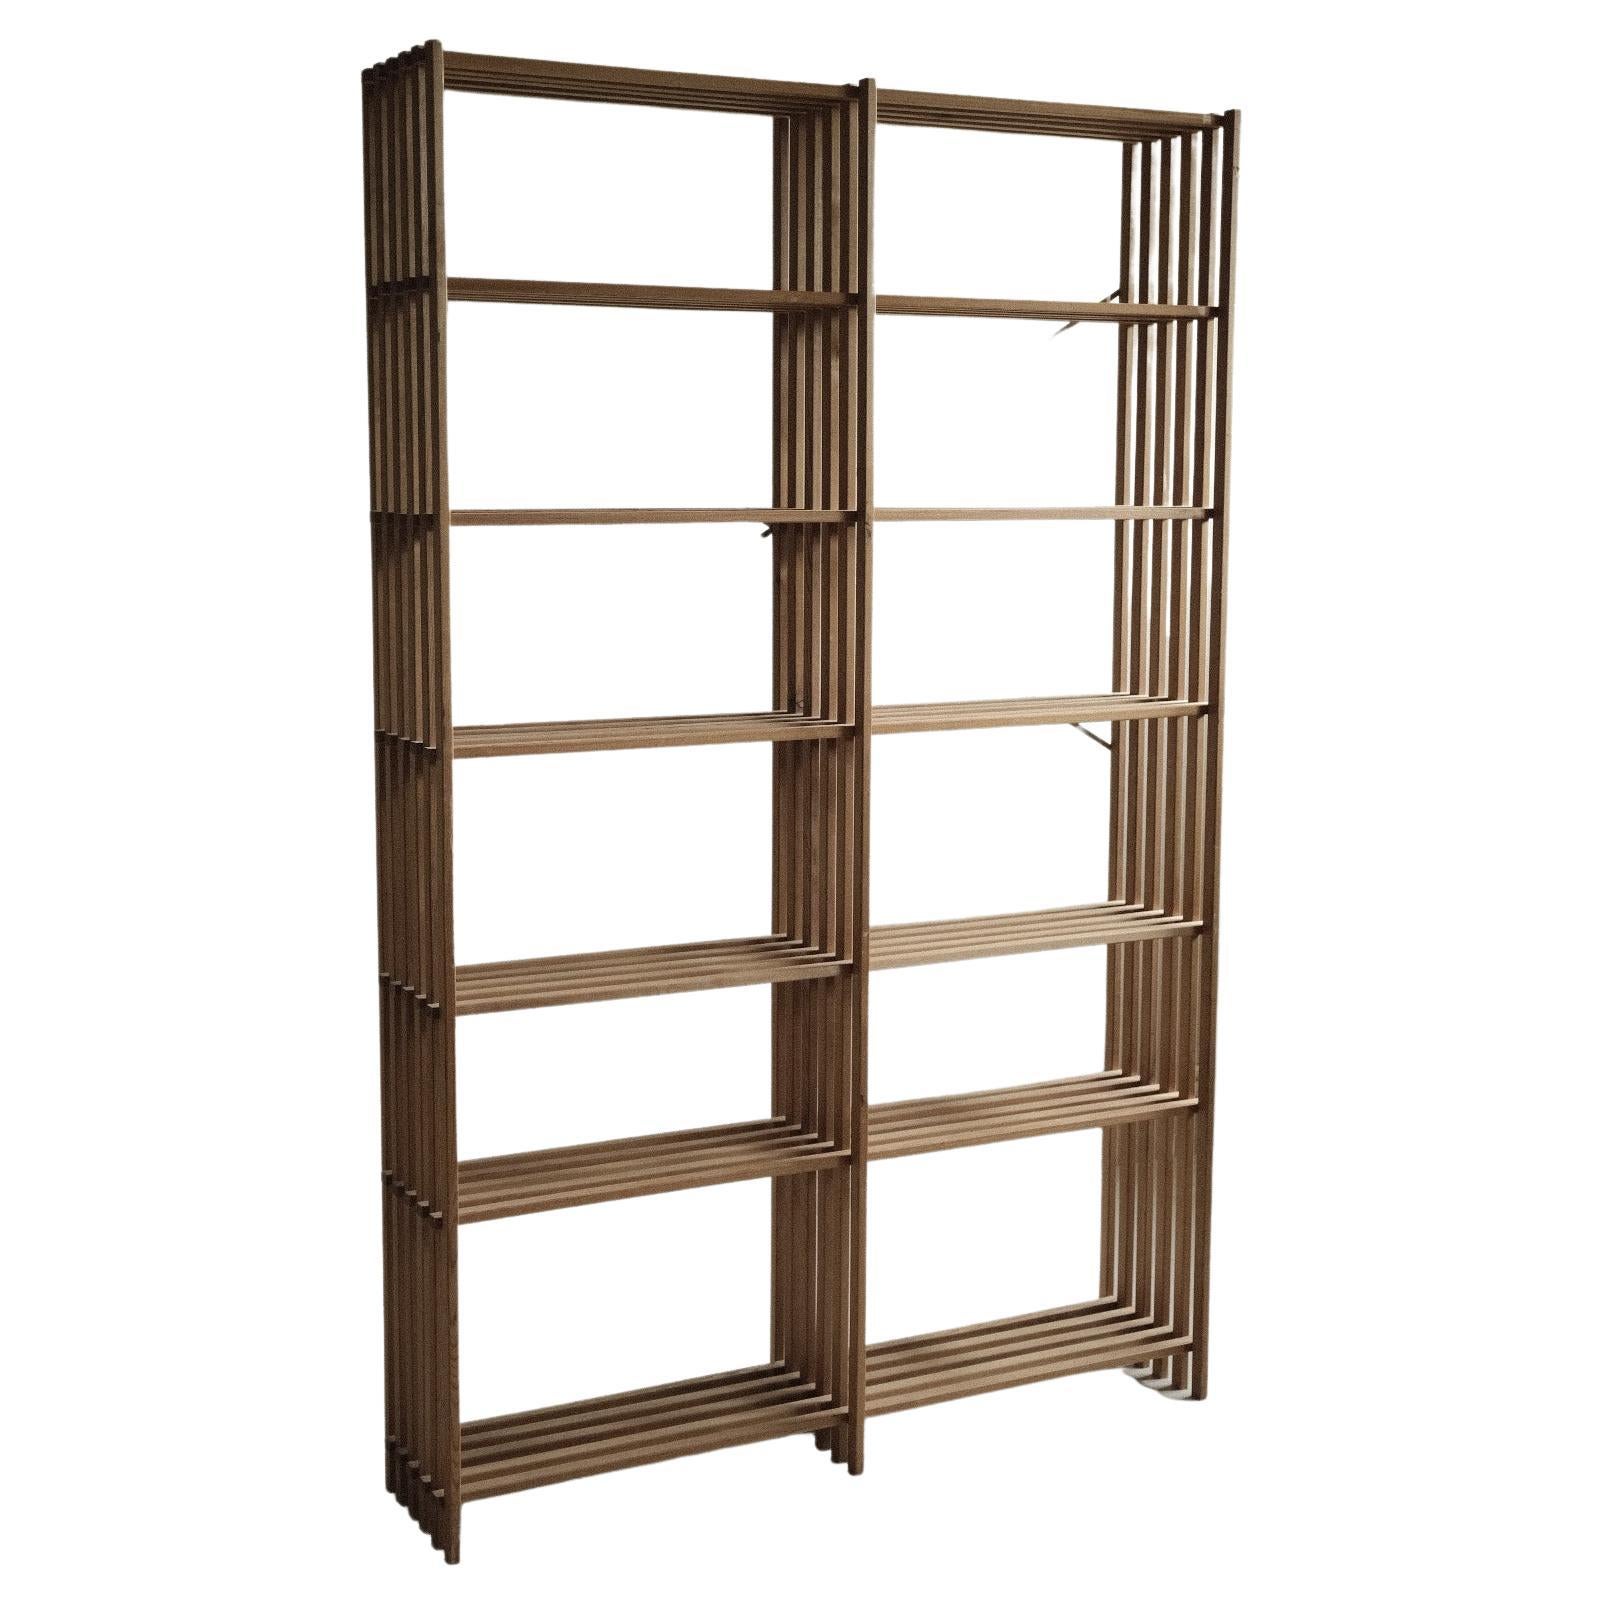 Vintage Bookcase by Thorvald Lissau for Wiinberg, Denmark, 1970s